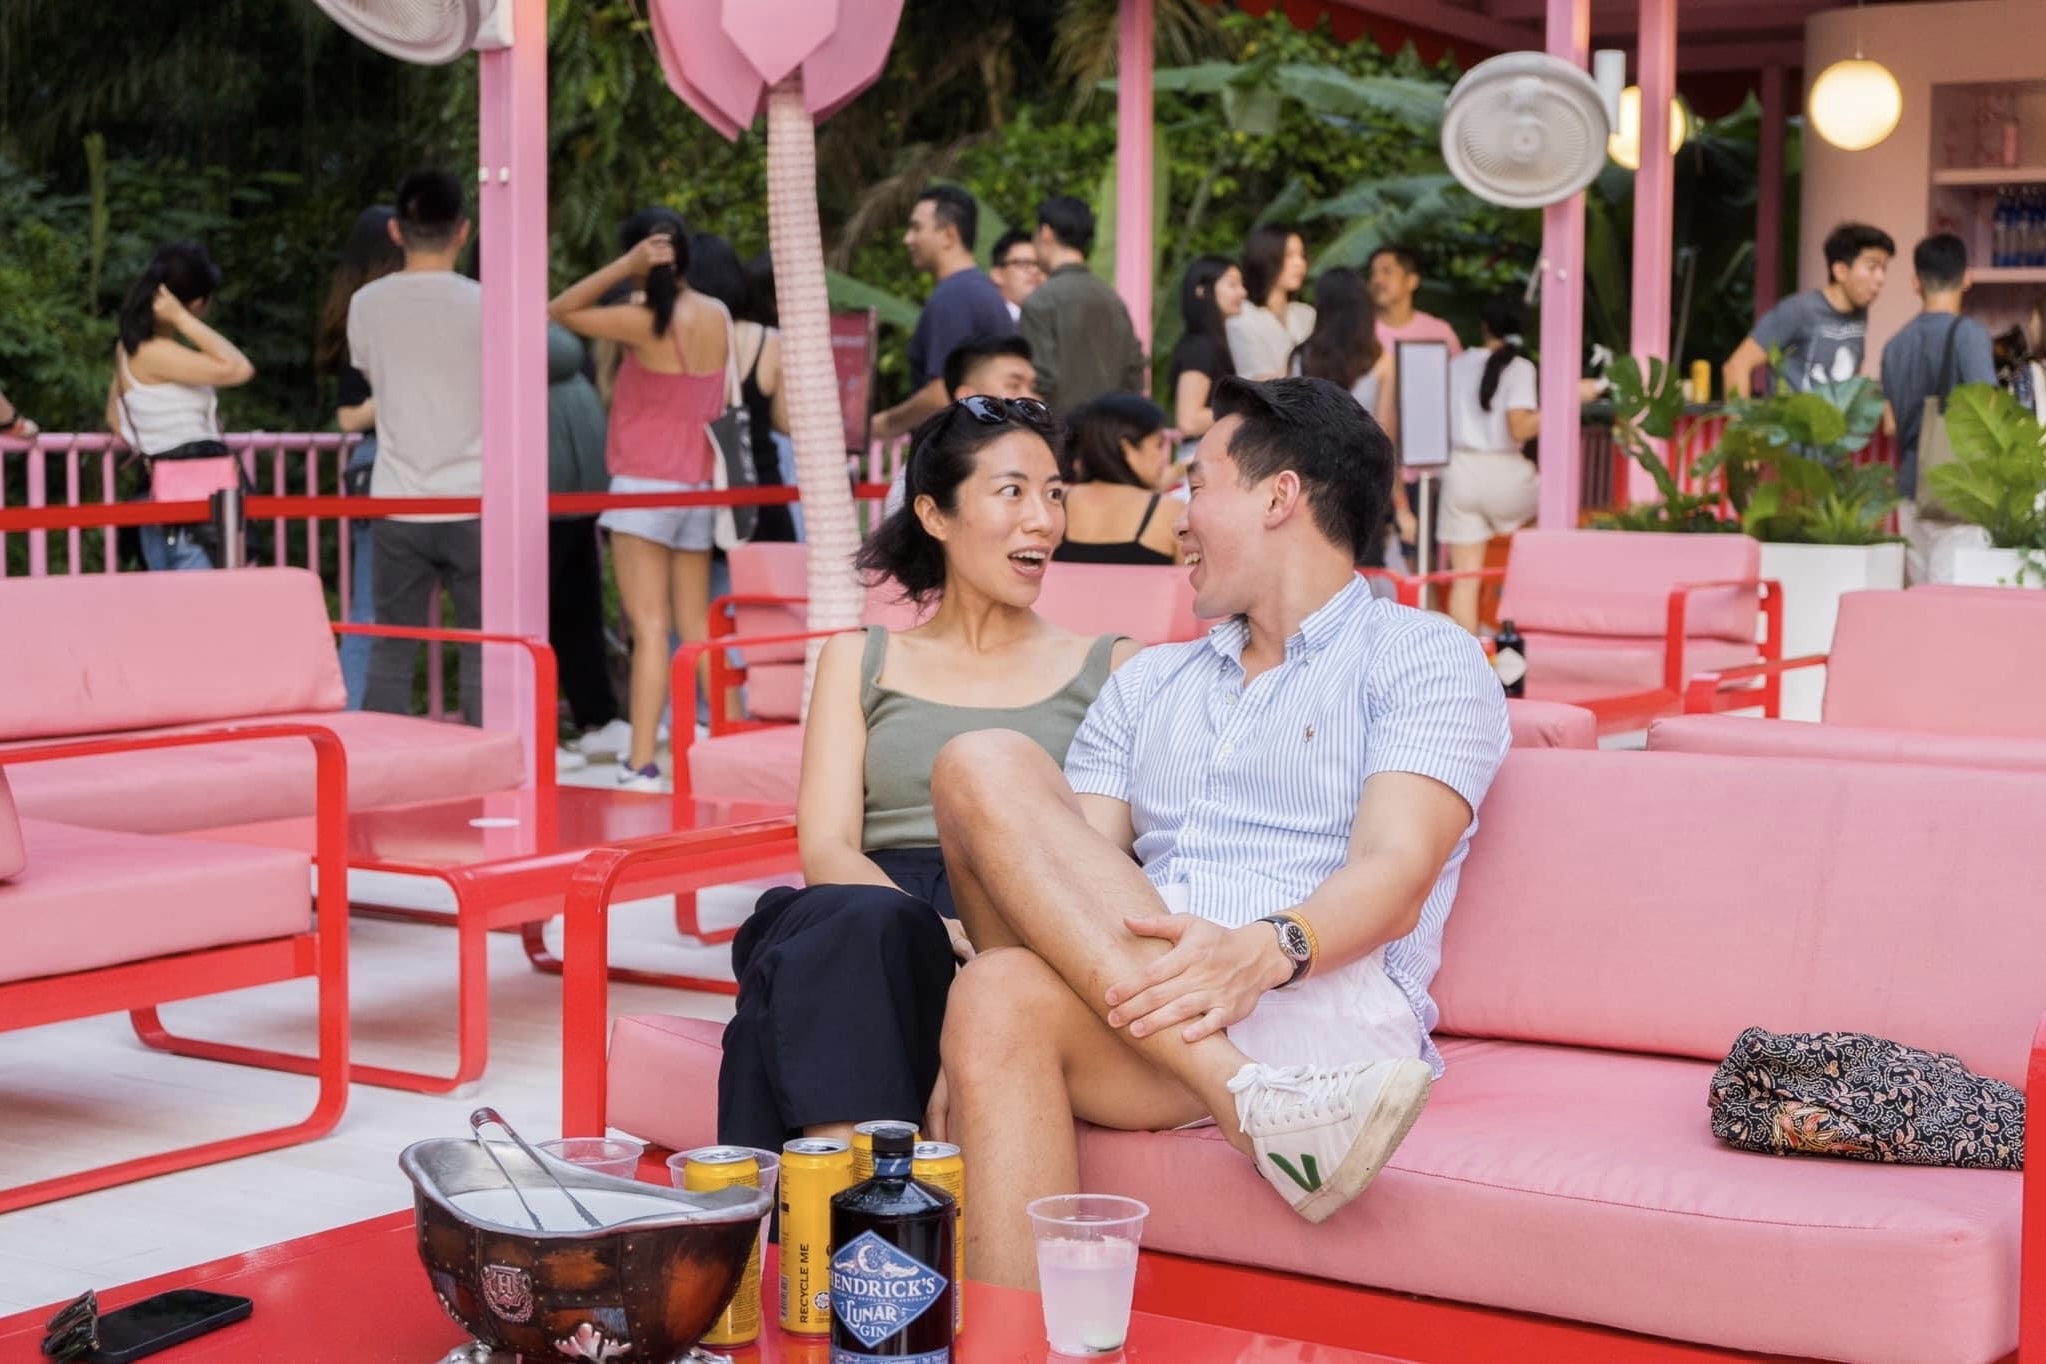 Cute date ideas beyond your normal dinner & movies